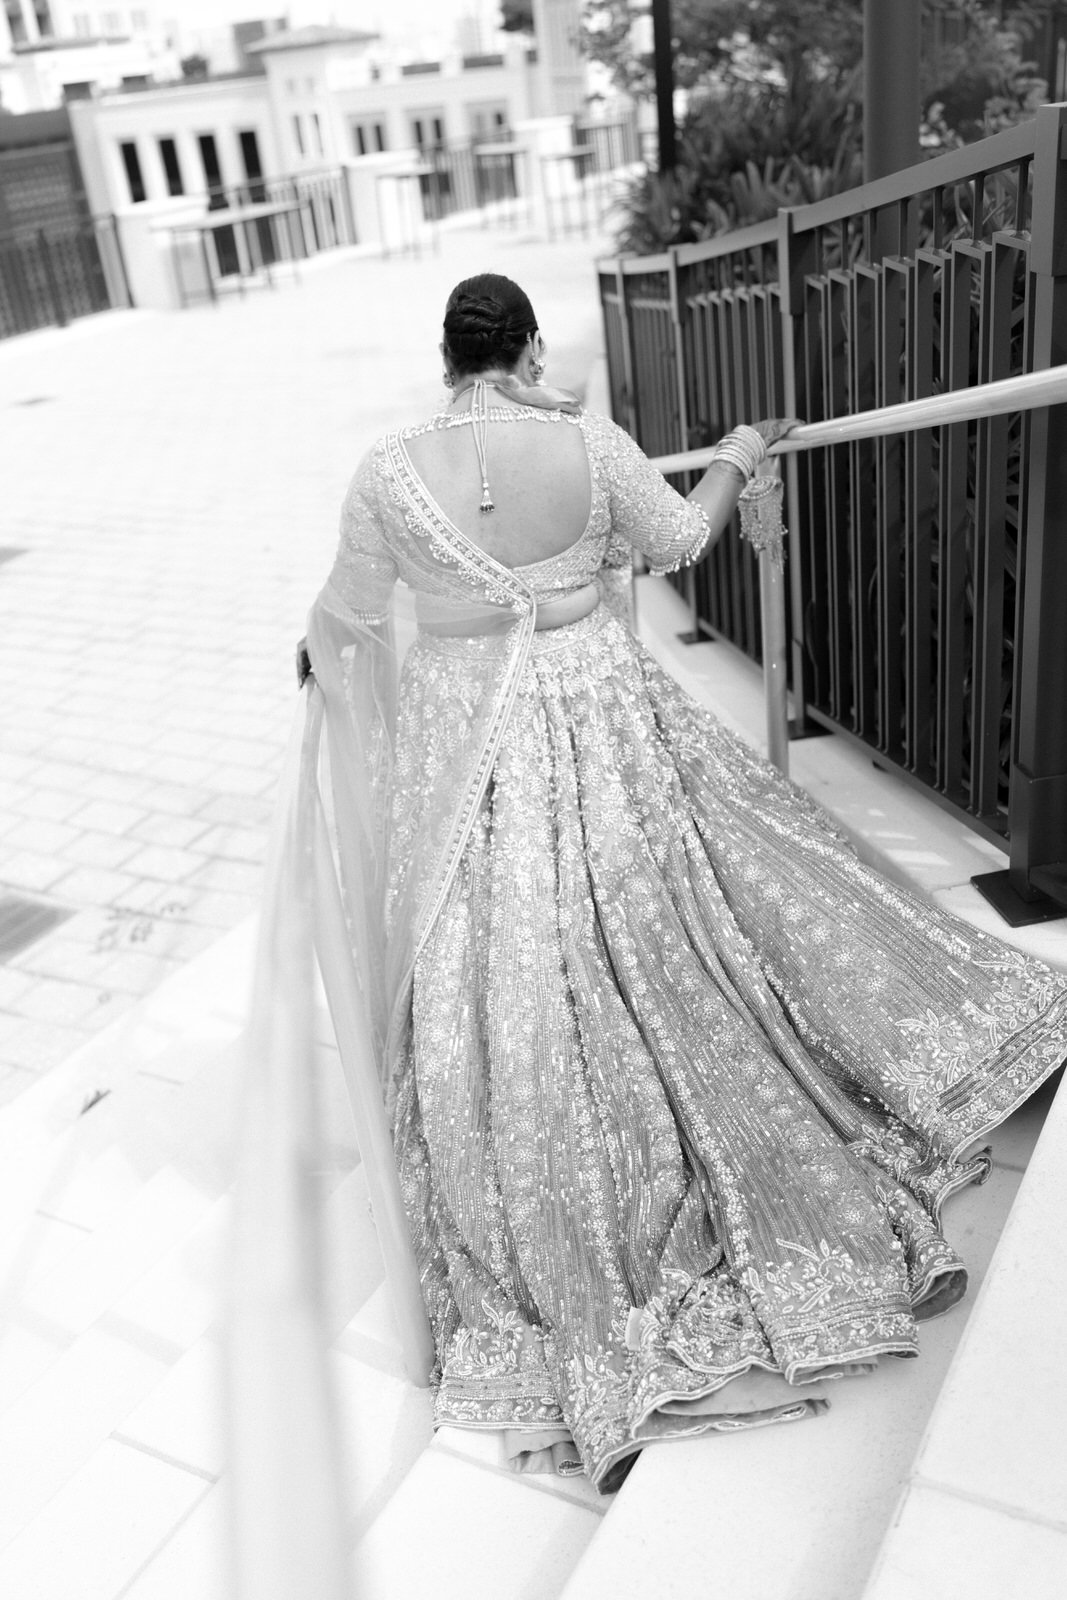 Luxury Indian Wedding in Miami Florida - Indian wedding photographer miami florida - michelle gonzalez photography - loews hotel in coral gables wedding-83.jpg